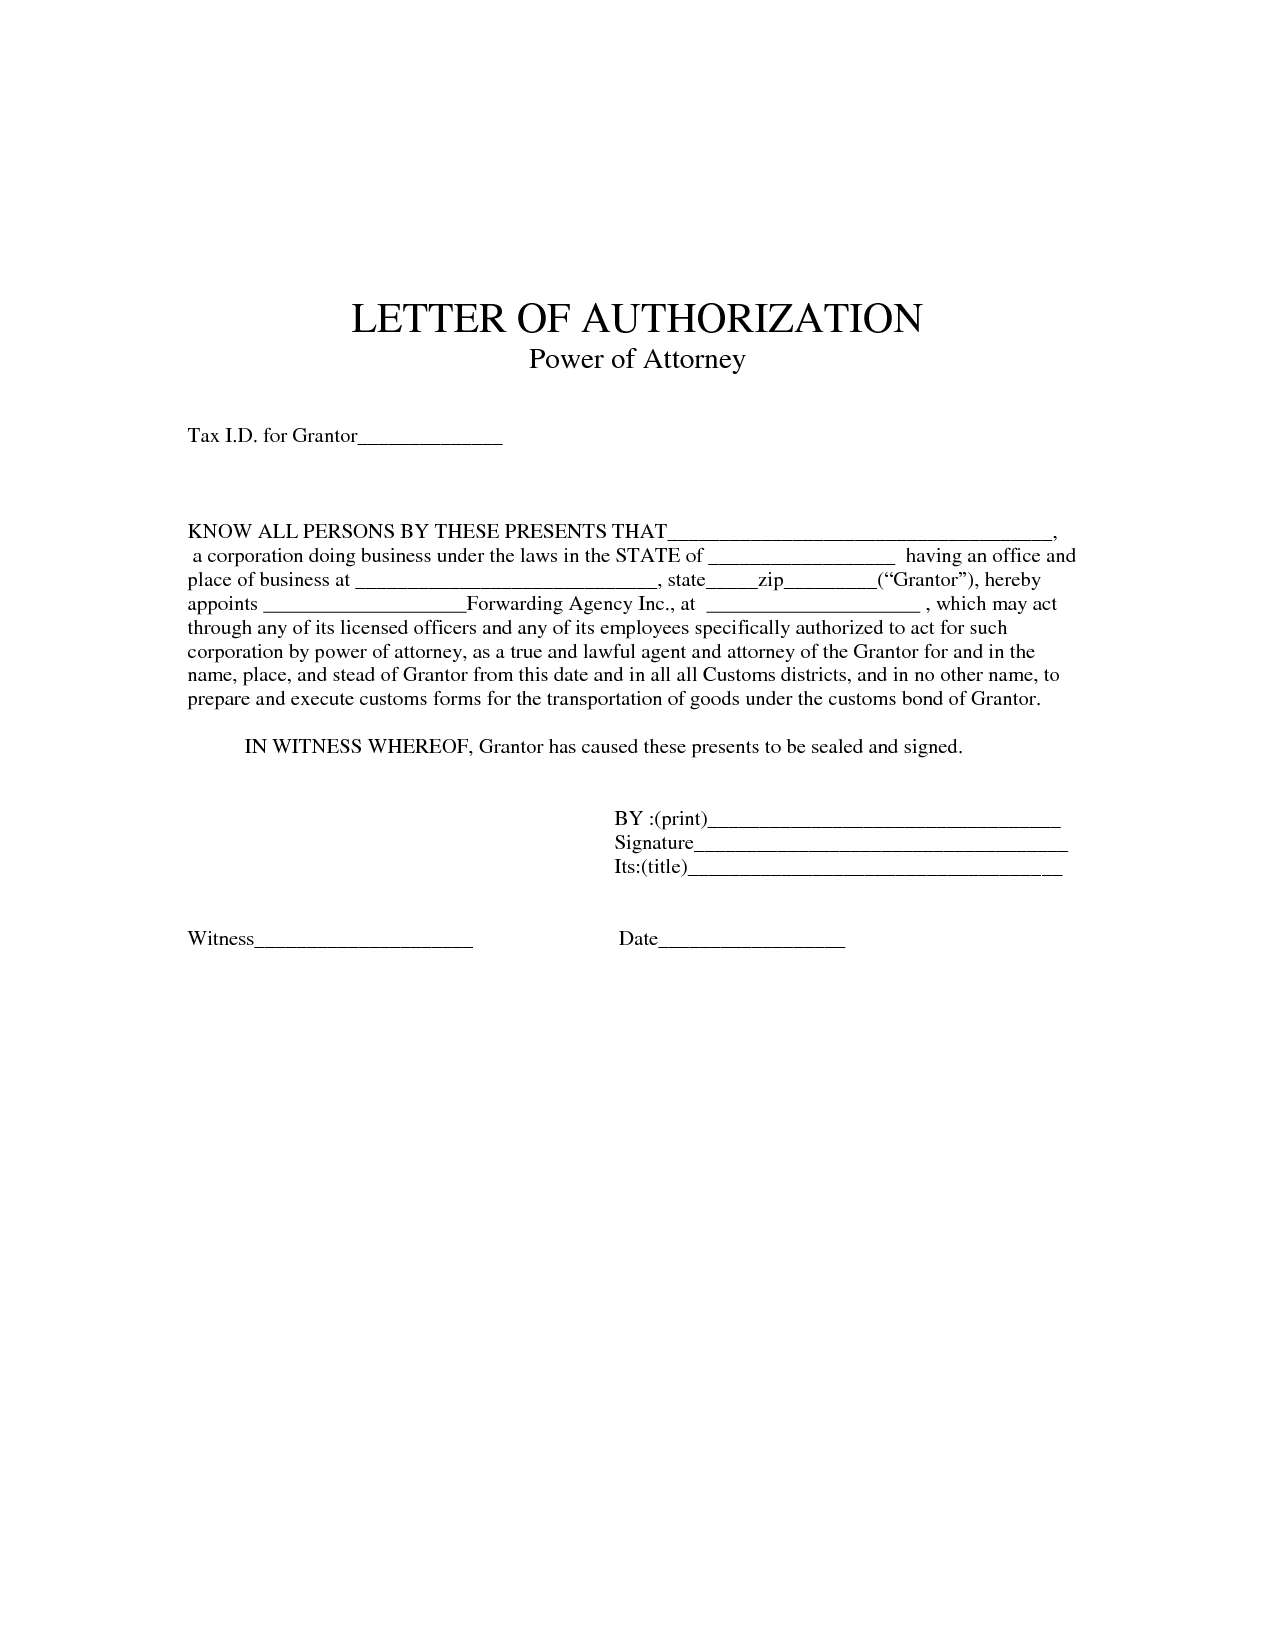 Power of Attorney Authorization Letter Sample